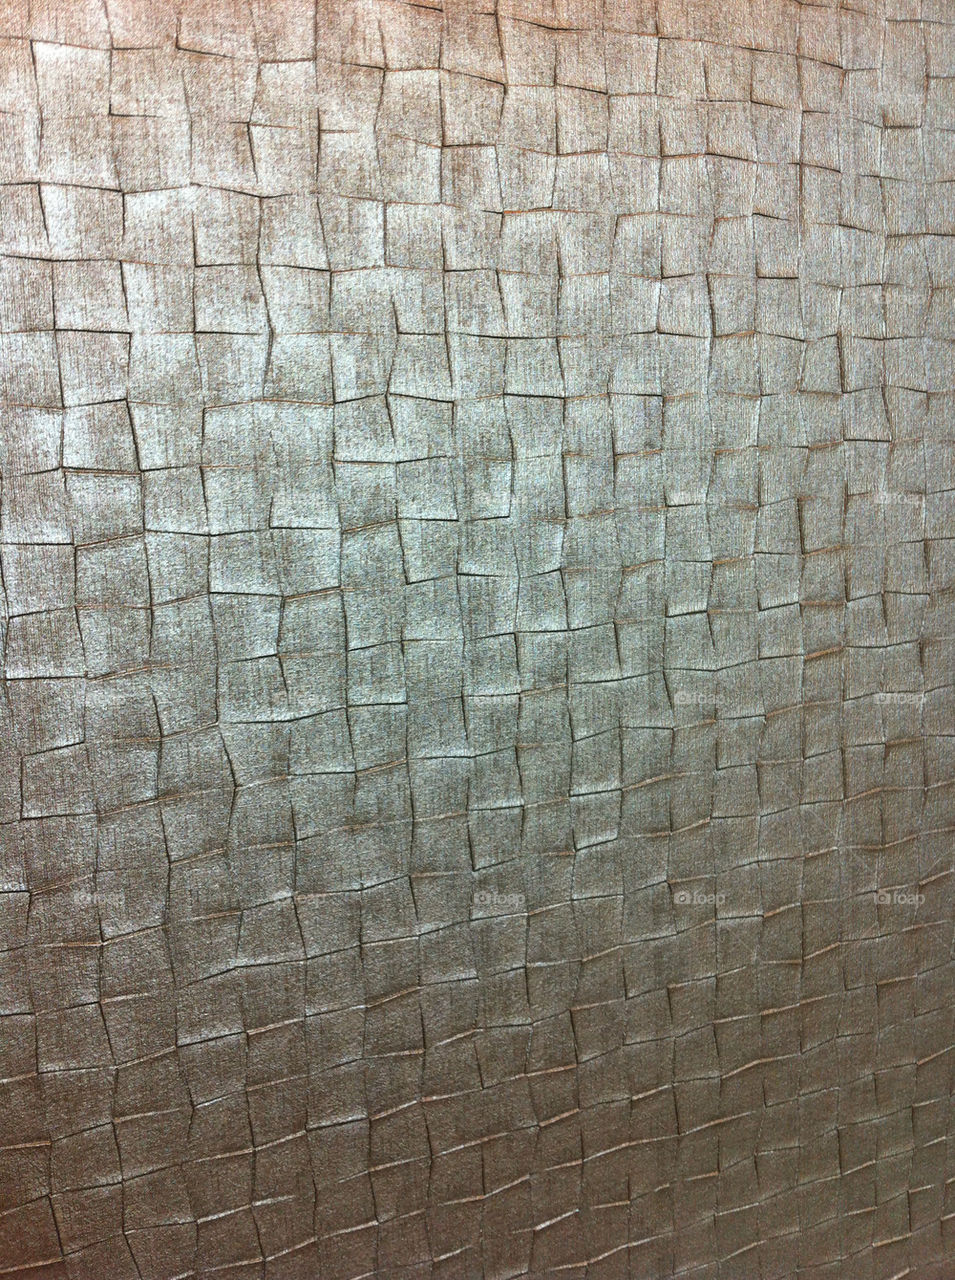 background silver texture weave by tplips01